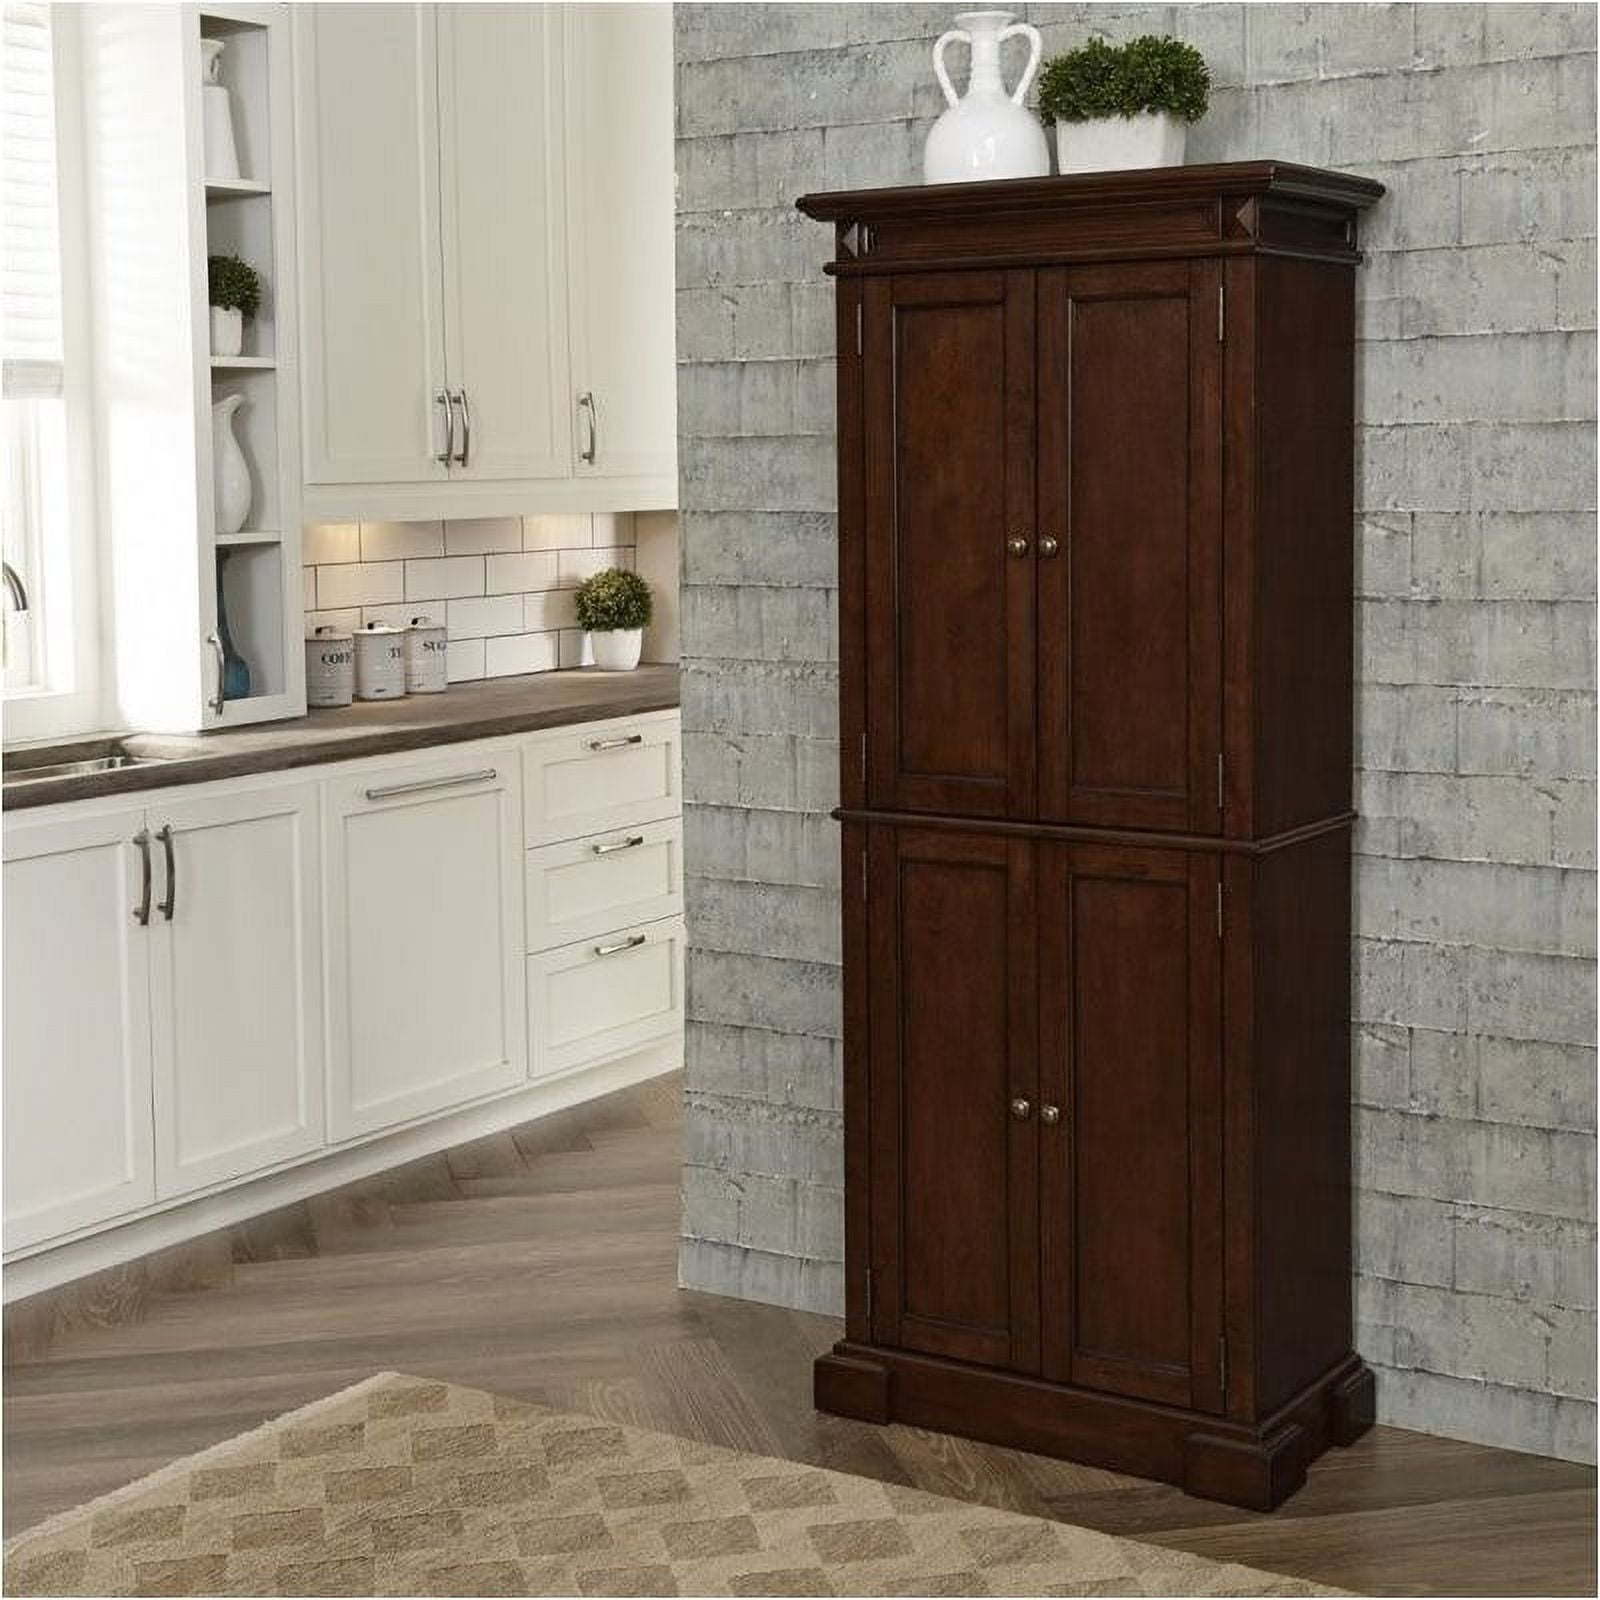 Park Hill Tearoom Pantry Cabinet